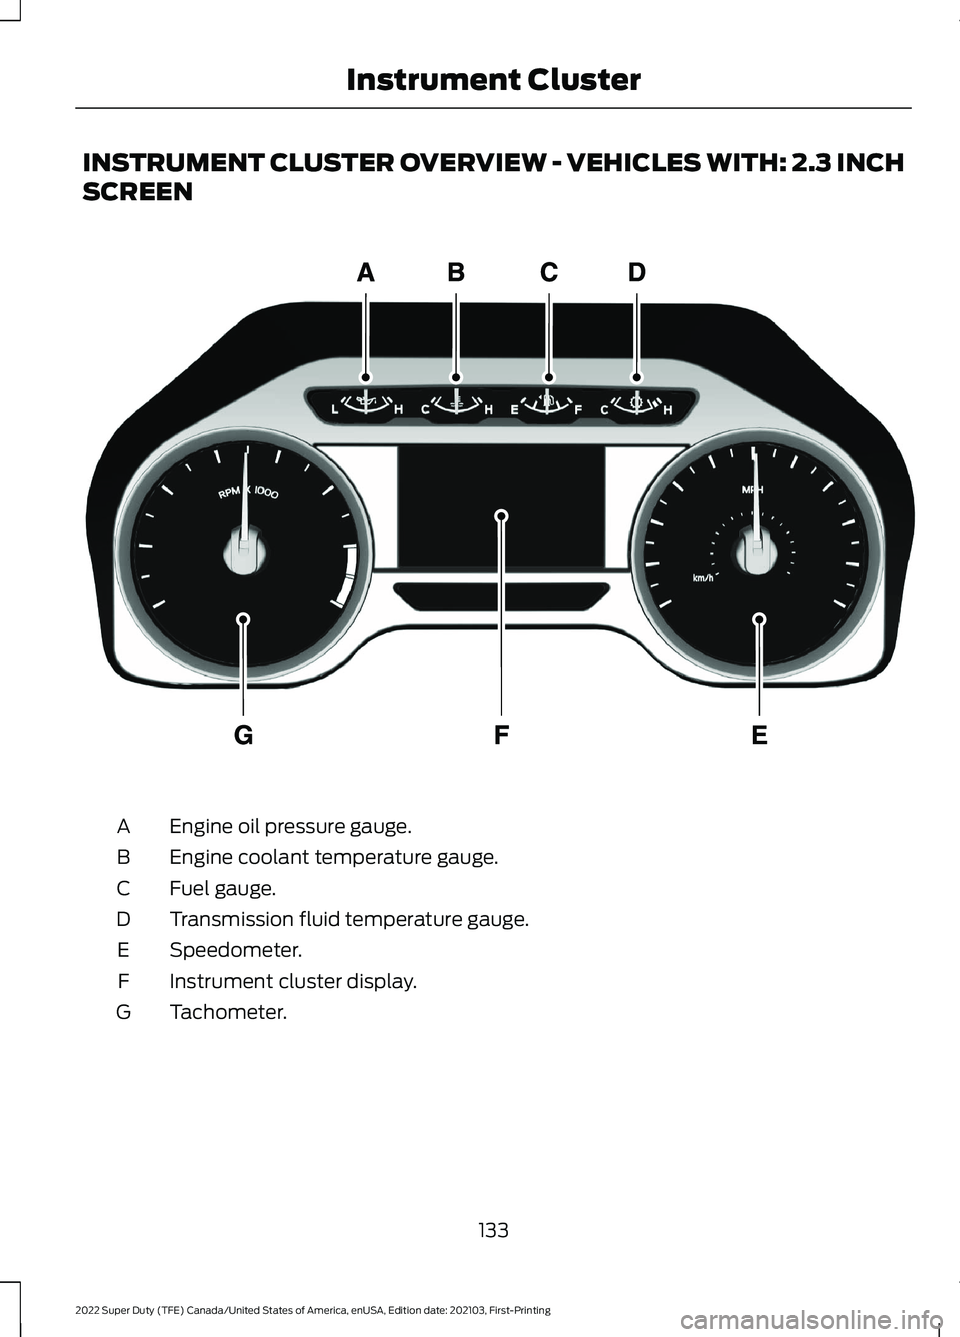 FORD F-350 2022  Owners Manual INSTRUMENT CLUSTER OVERVIEW - VEHICLES WITH: 2.3 INCH
SCREEN
Engine oil pressure gauge.
A
Engine coolant temperature gauge.
B
Fuel gauge.
C
Transmission fluid temperature gauge.
D
Speedometer.
E
Instr